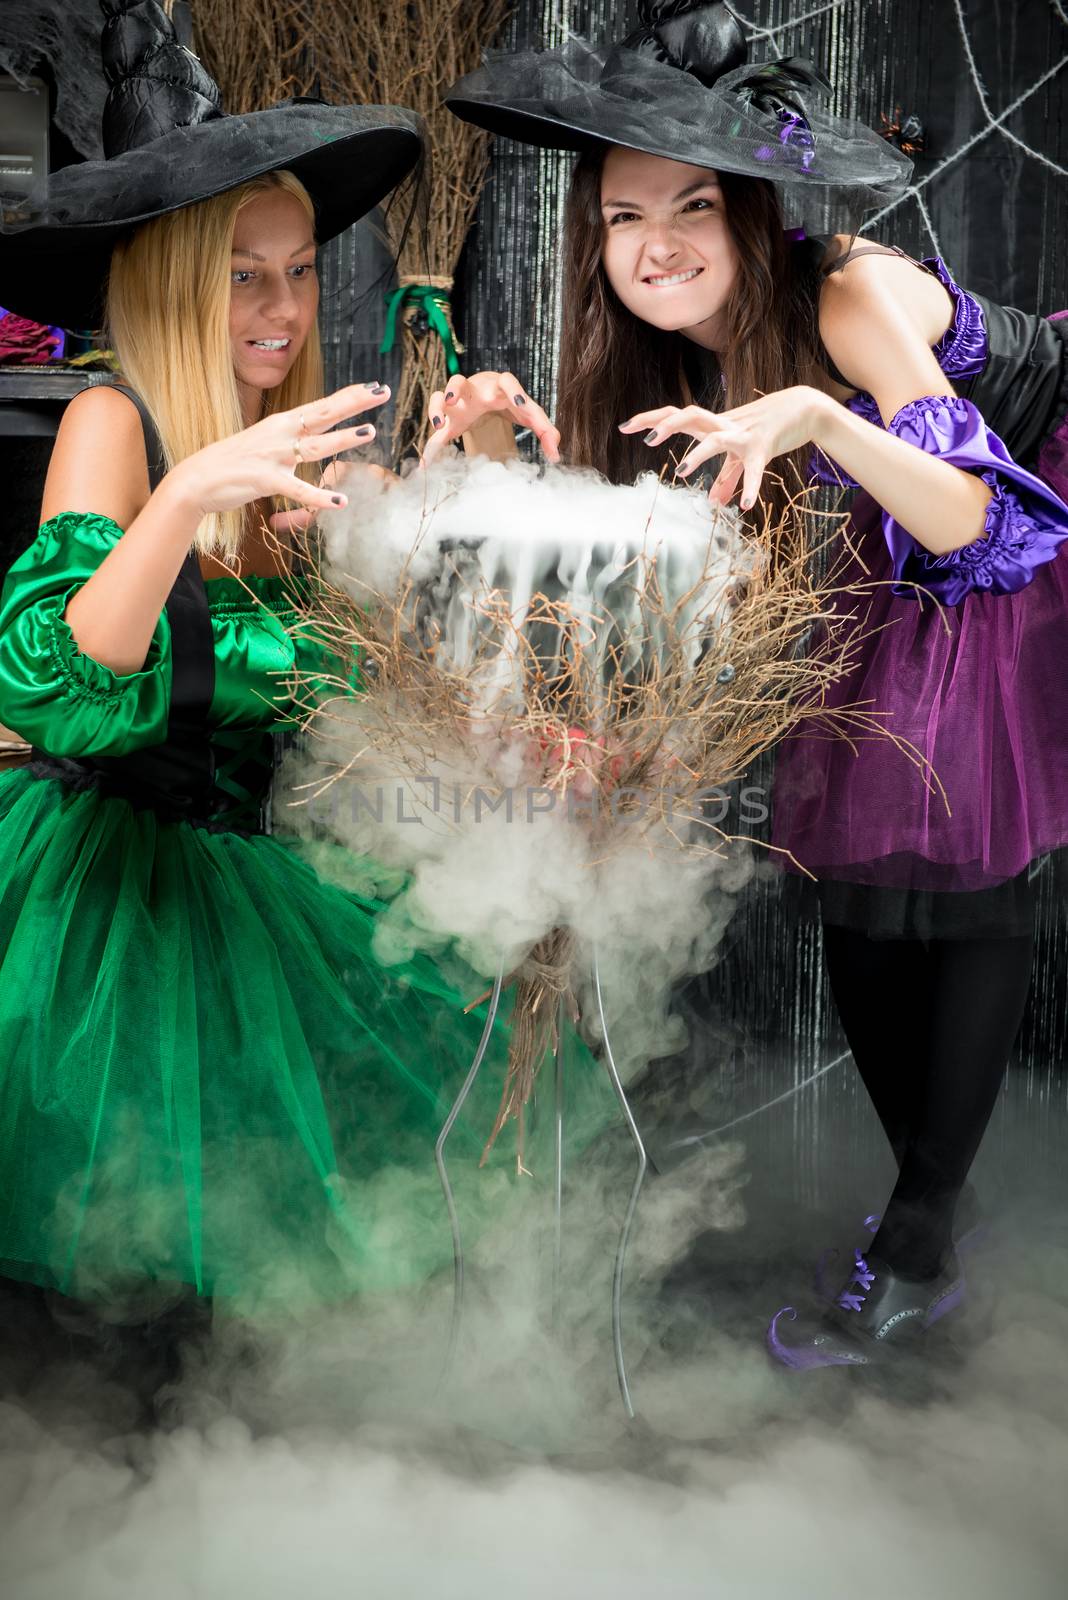 two evil witches brew a potion in the pot, to Halloween by kosmsos111